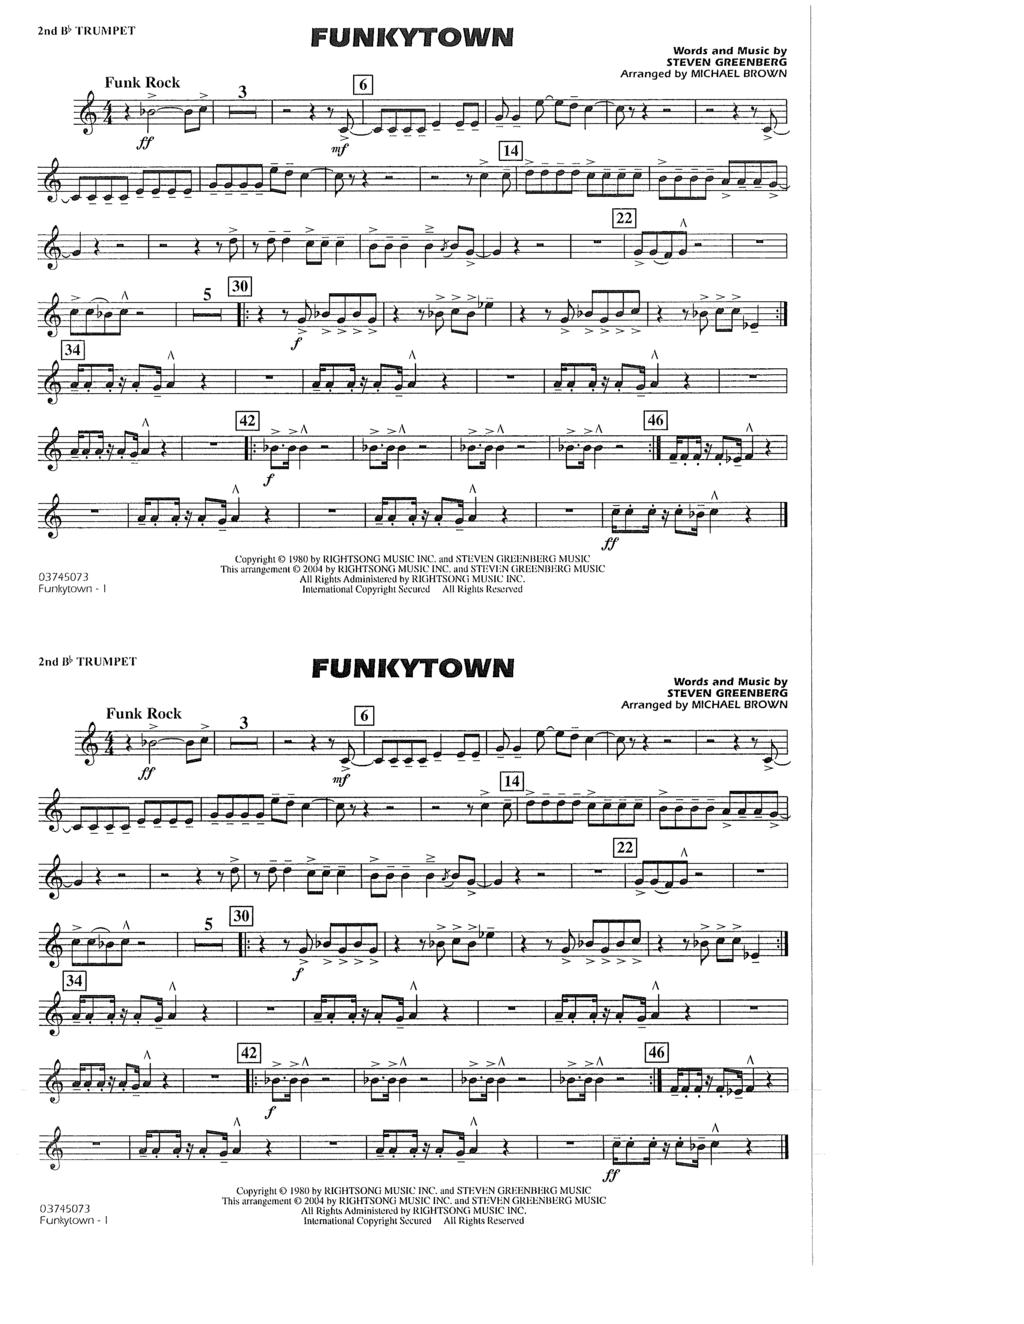 2nd Bl- TRUMPET FUWIC OWM 0 STEVEN G EENBERG f T ITP LJ '. "; mf 14 > 1 > _ > > ff<gl > 34 30 f > > > J)t> 42 ut -..i. E/r-r- at OT / Funkytown - Copyright 1980 by RIGHTSONG MUSIC INC.